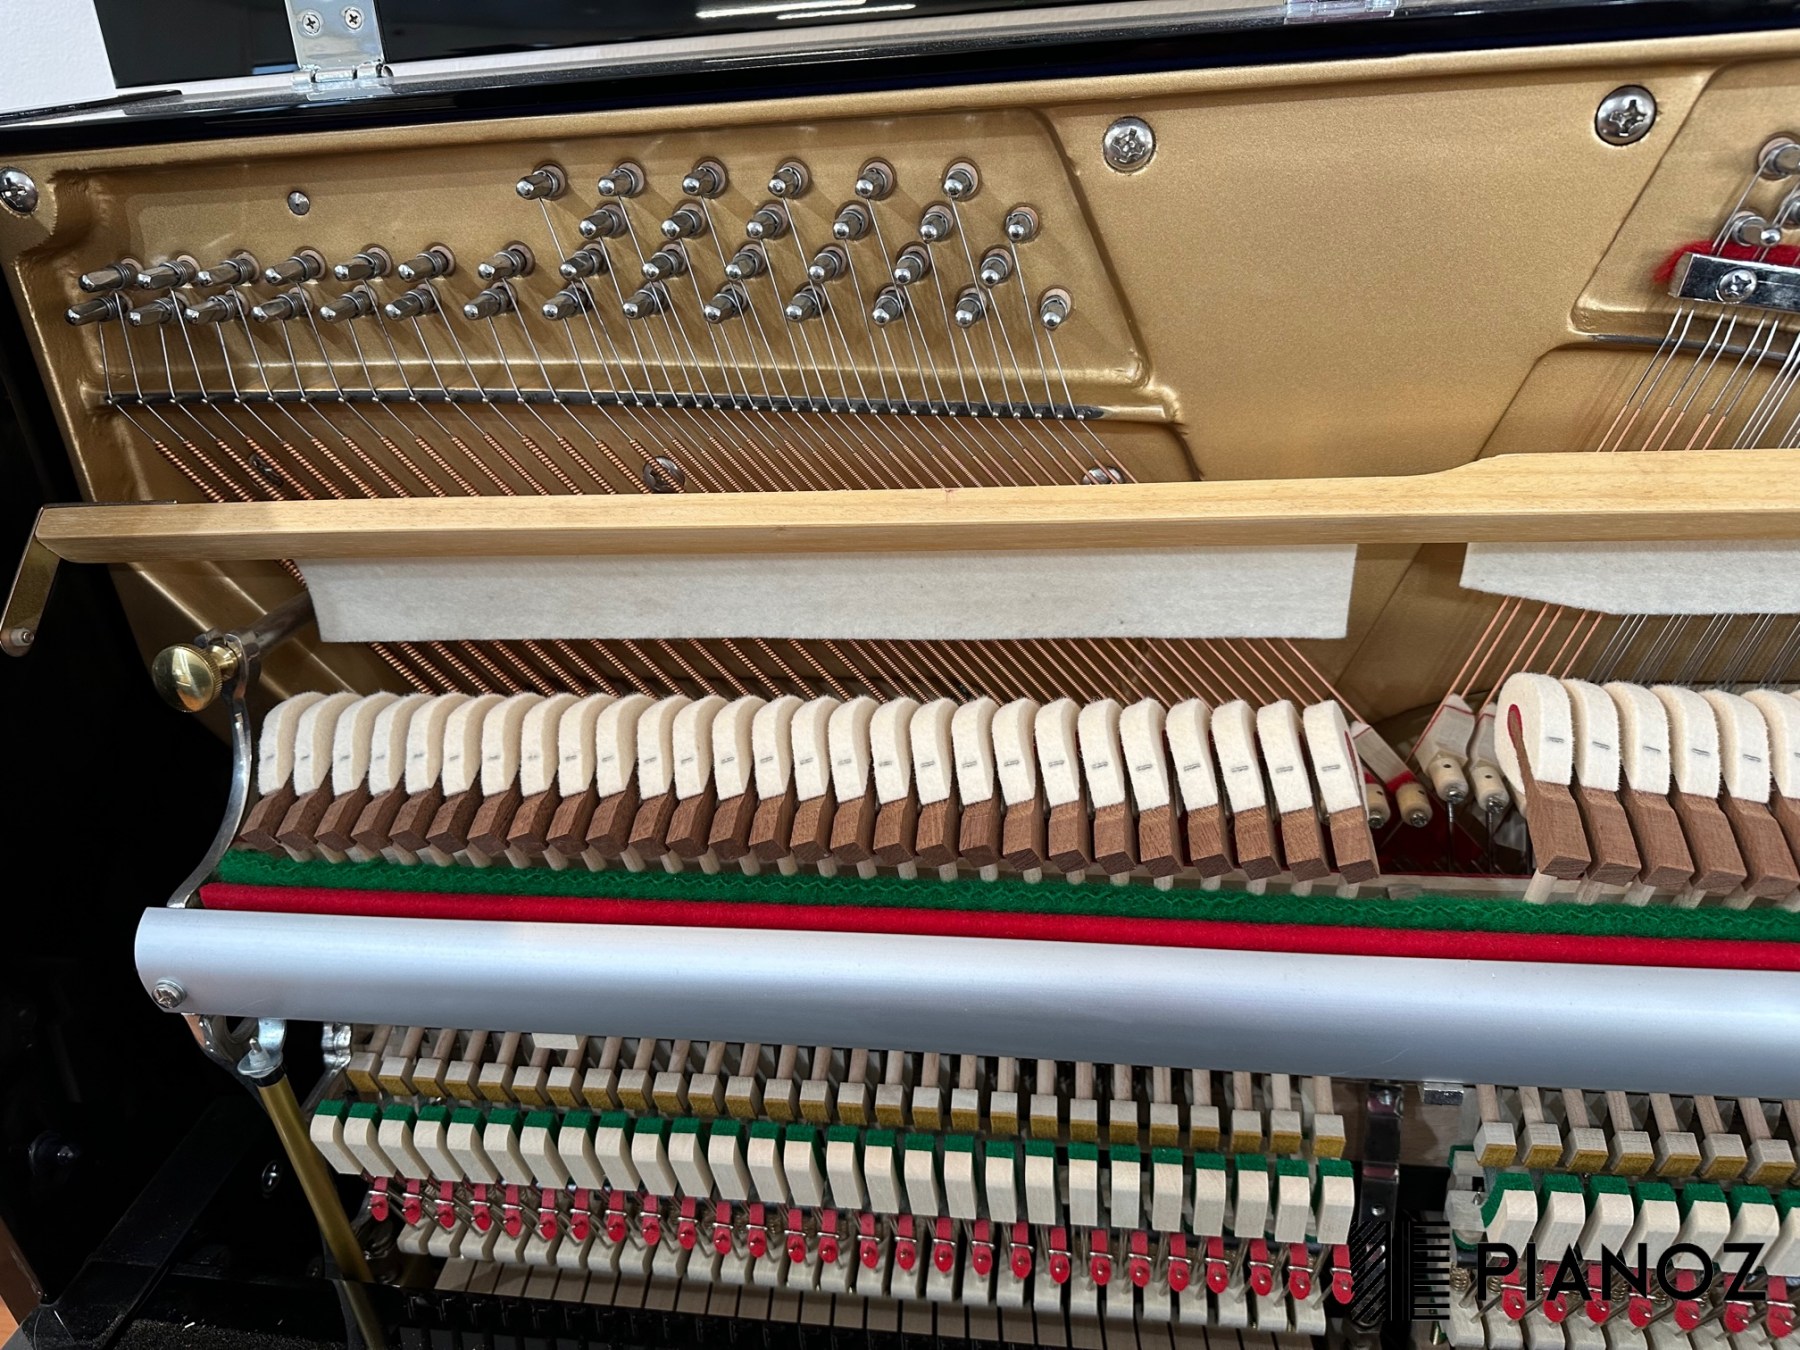 Hamlyn Klein UP123 Upright Piano piano for sale in UK